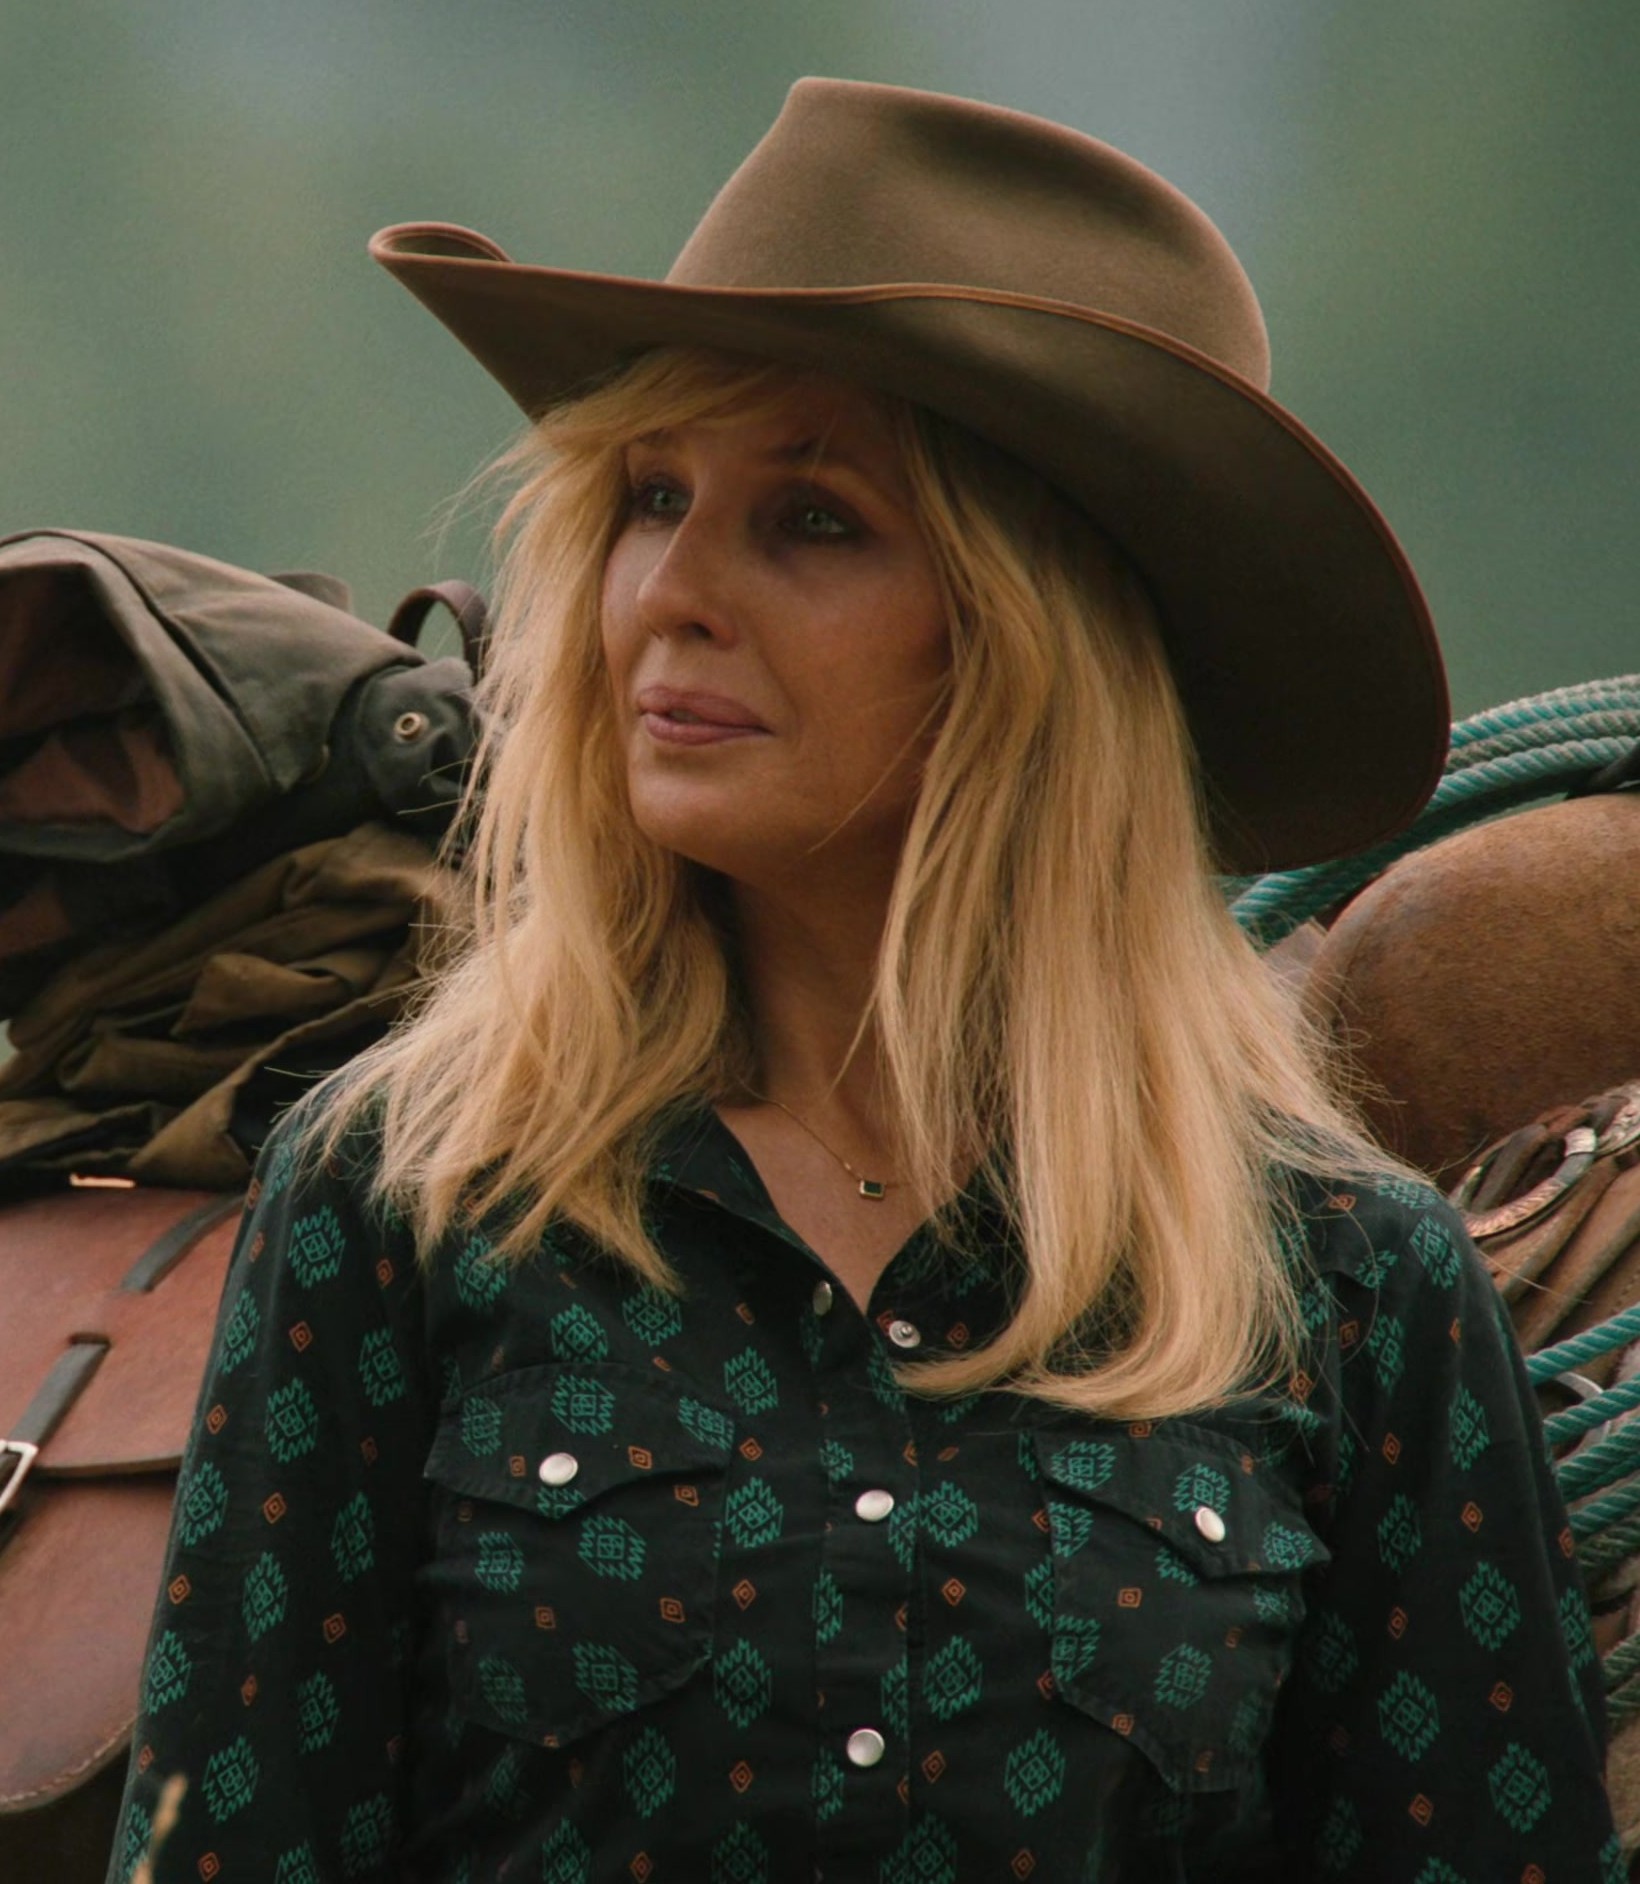 Worn on Yellowstone TV Show - Brown Wide-Brimmed Western Hat of Kelly Reilly as Bethany "Beth" Dutton